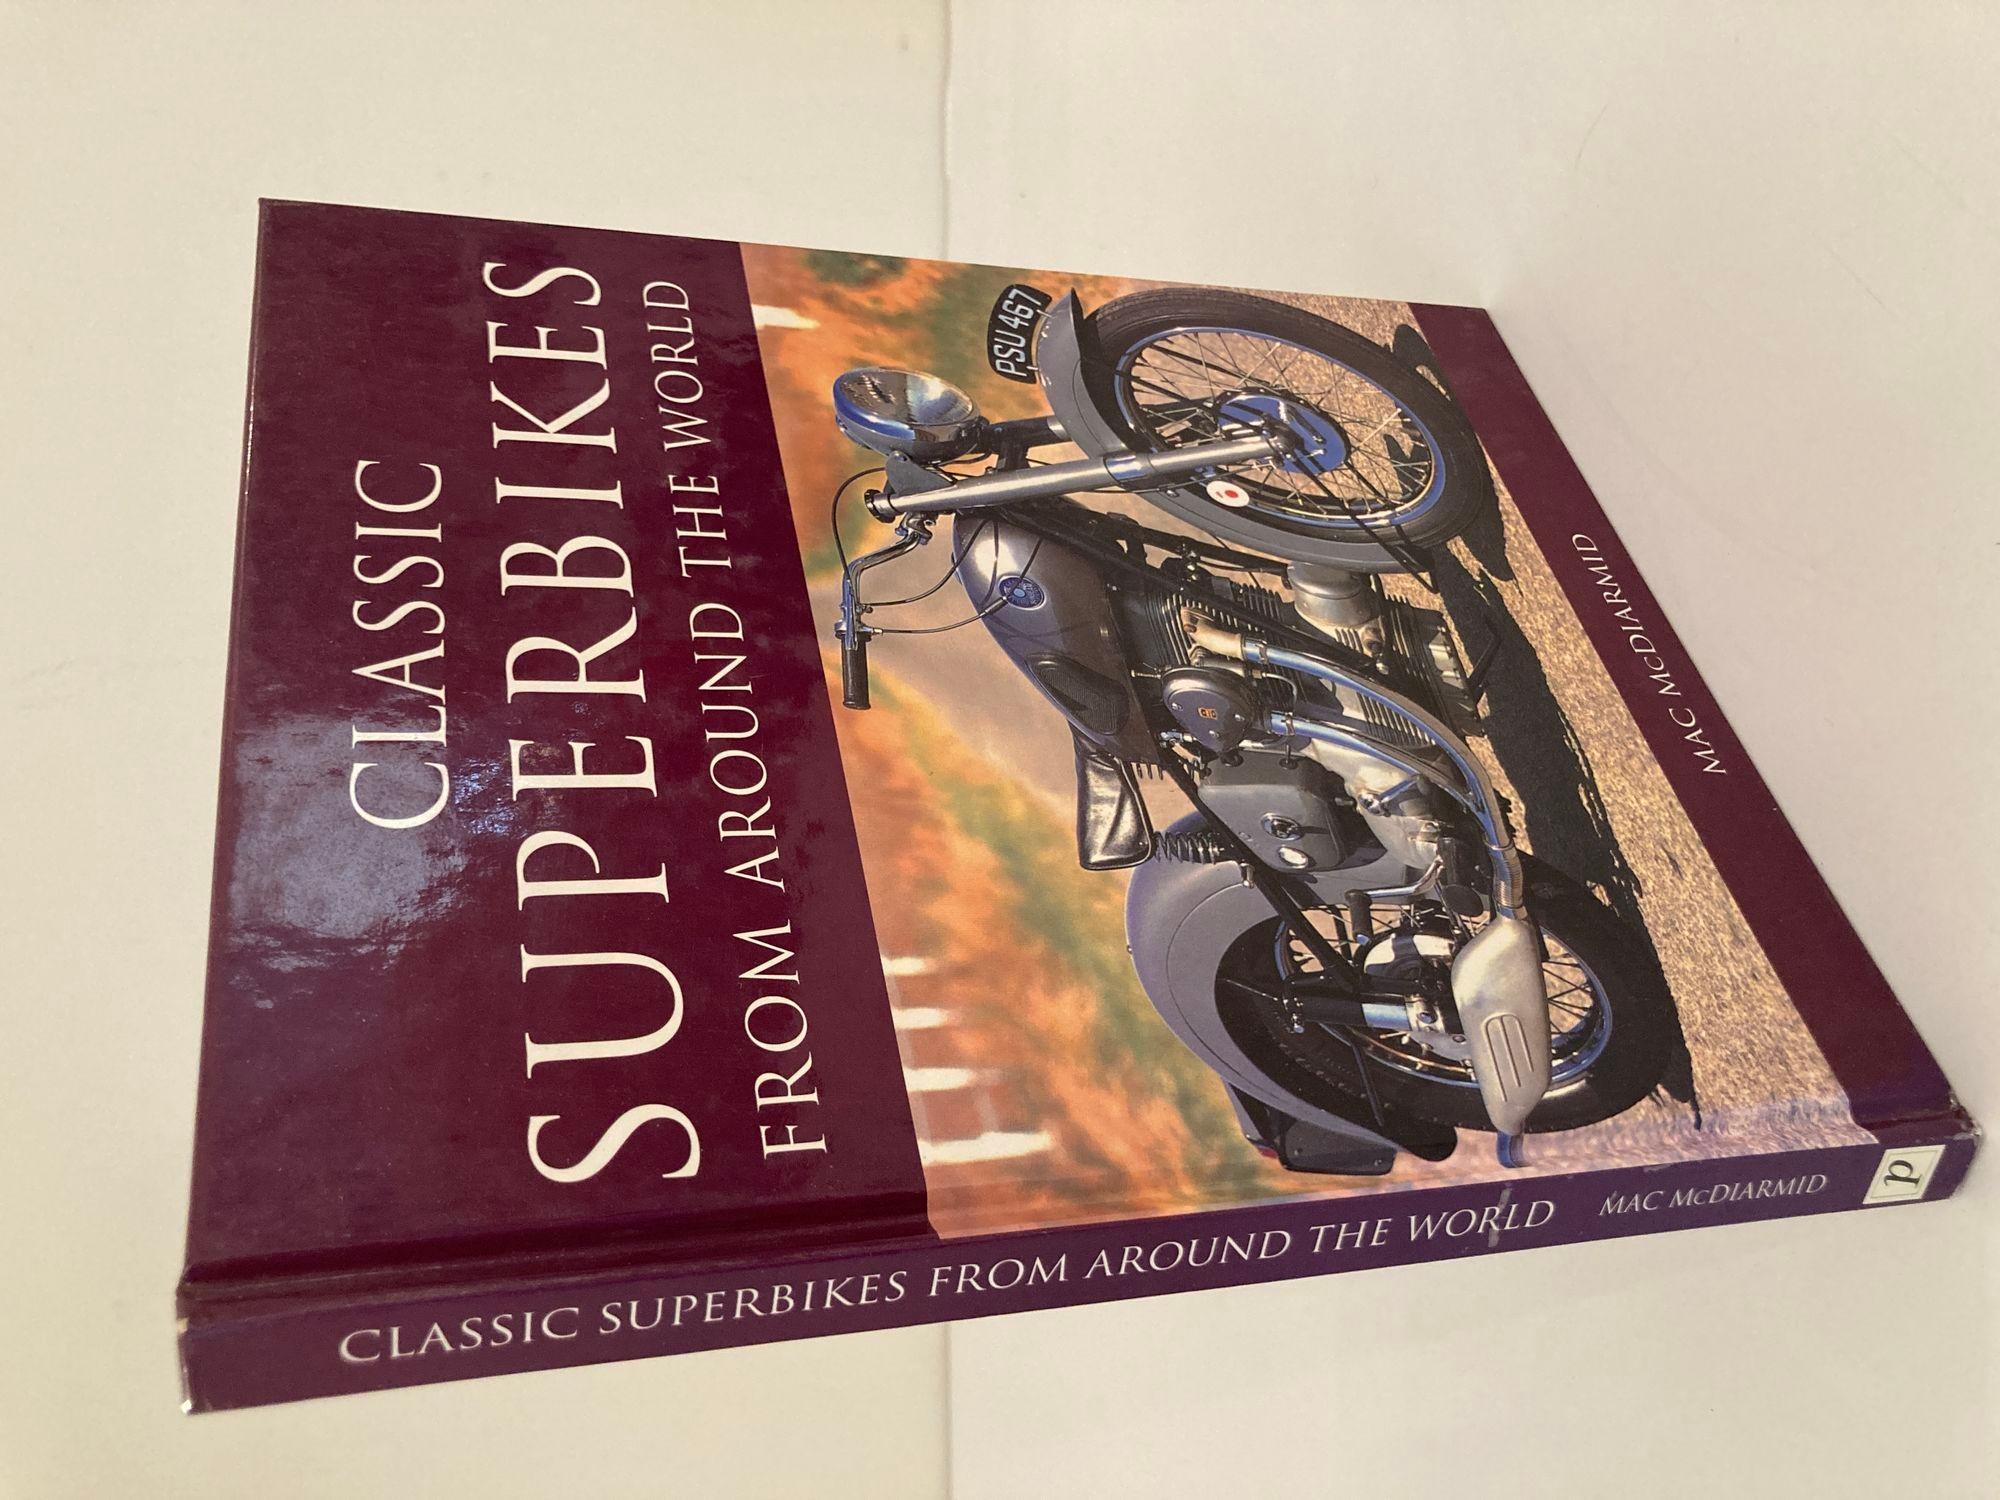 Classic Superbikes from Around the World Coffee Table Book Hardcover 2003 For Sale 6